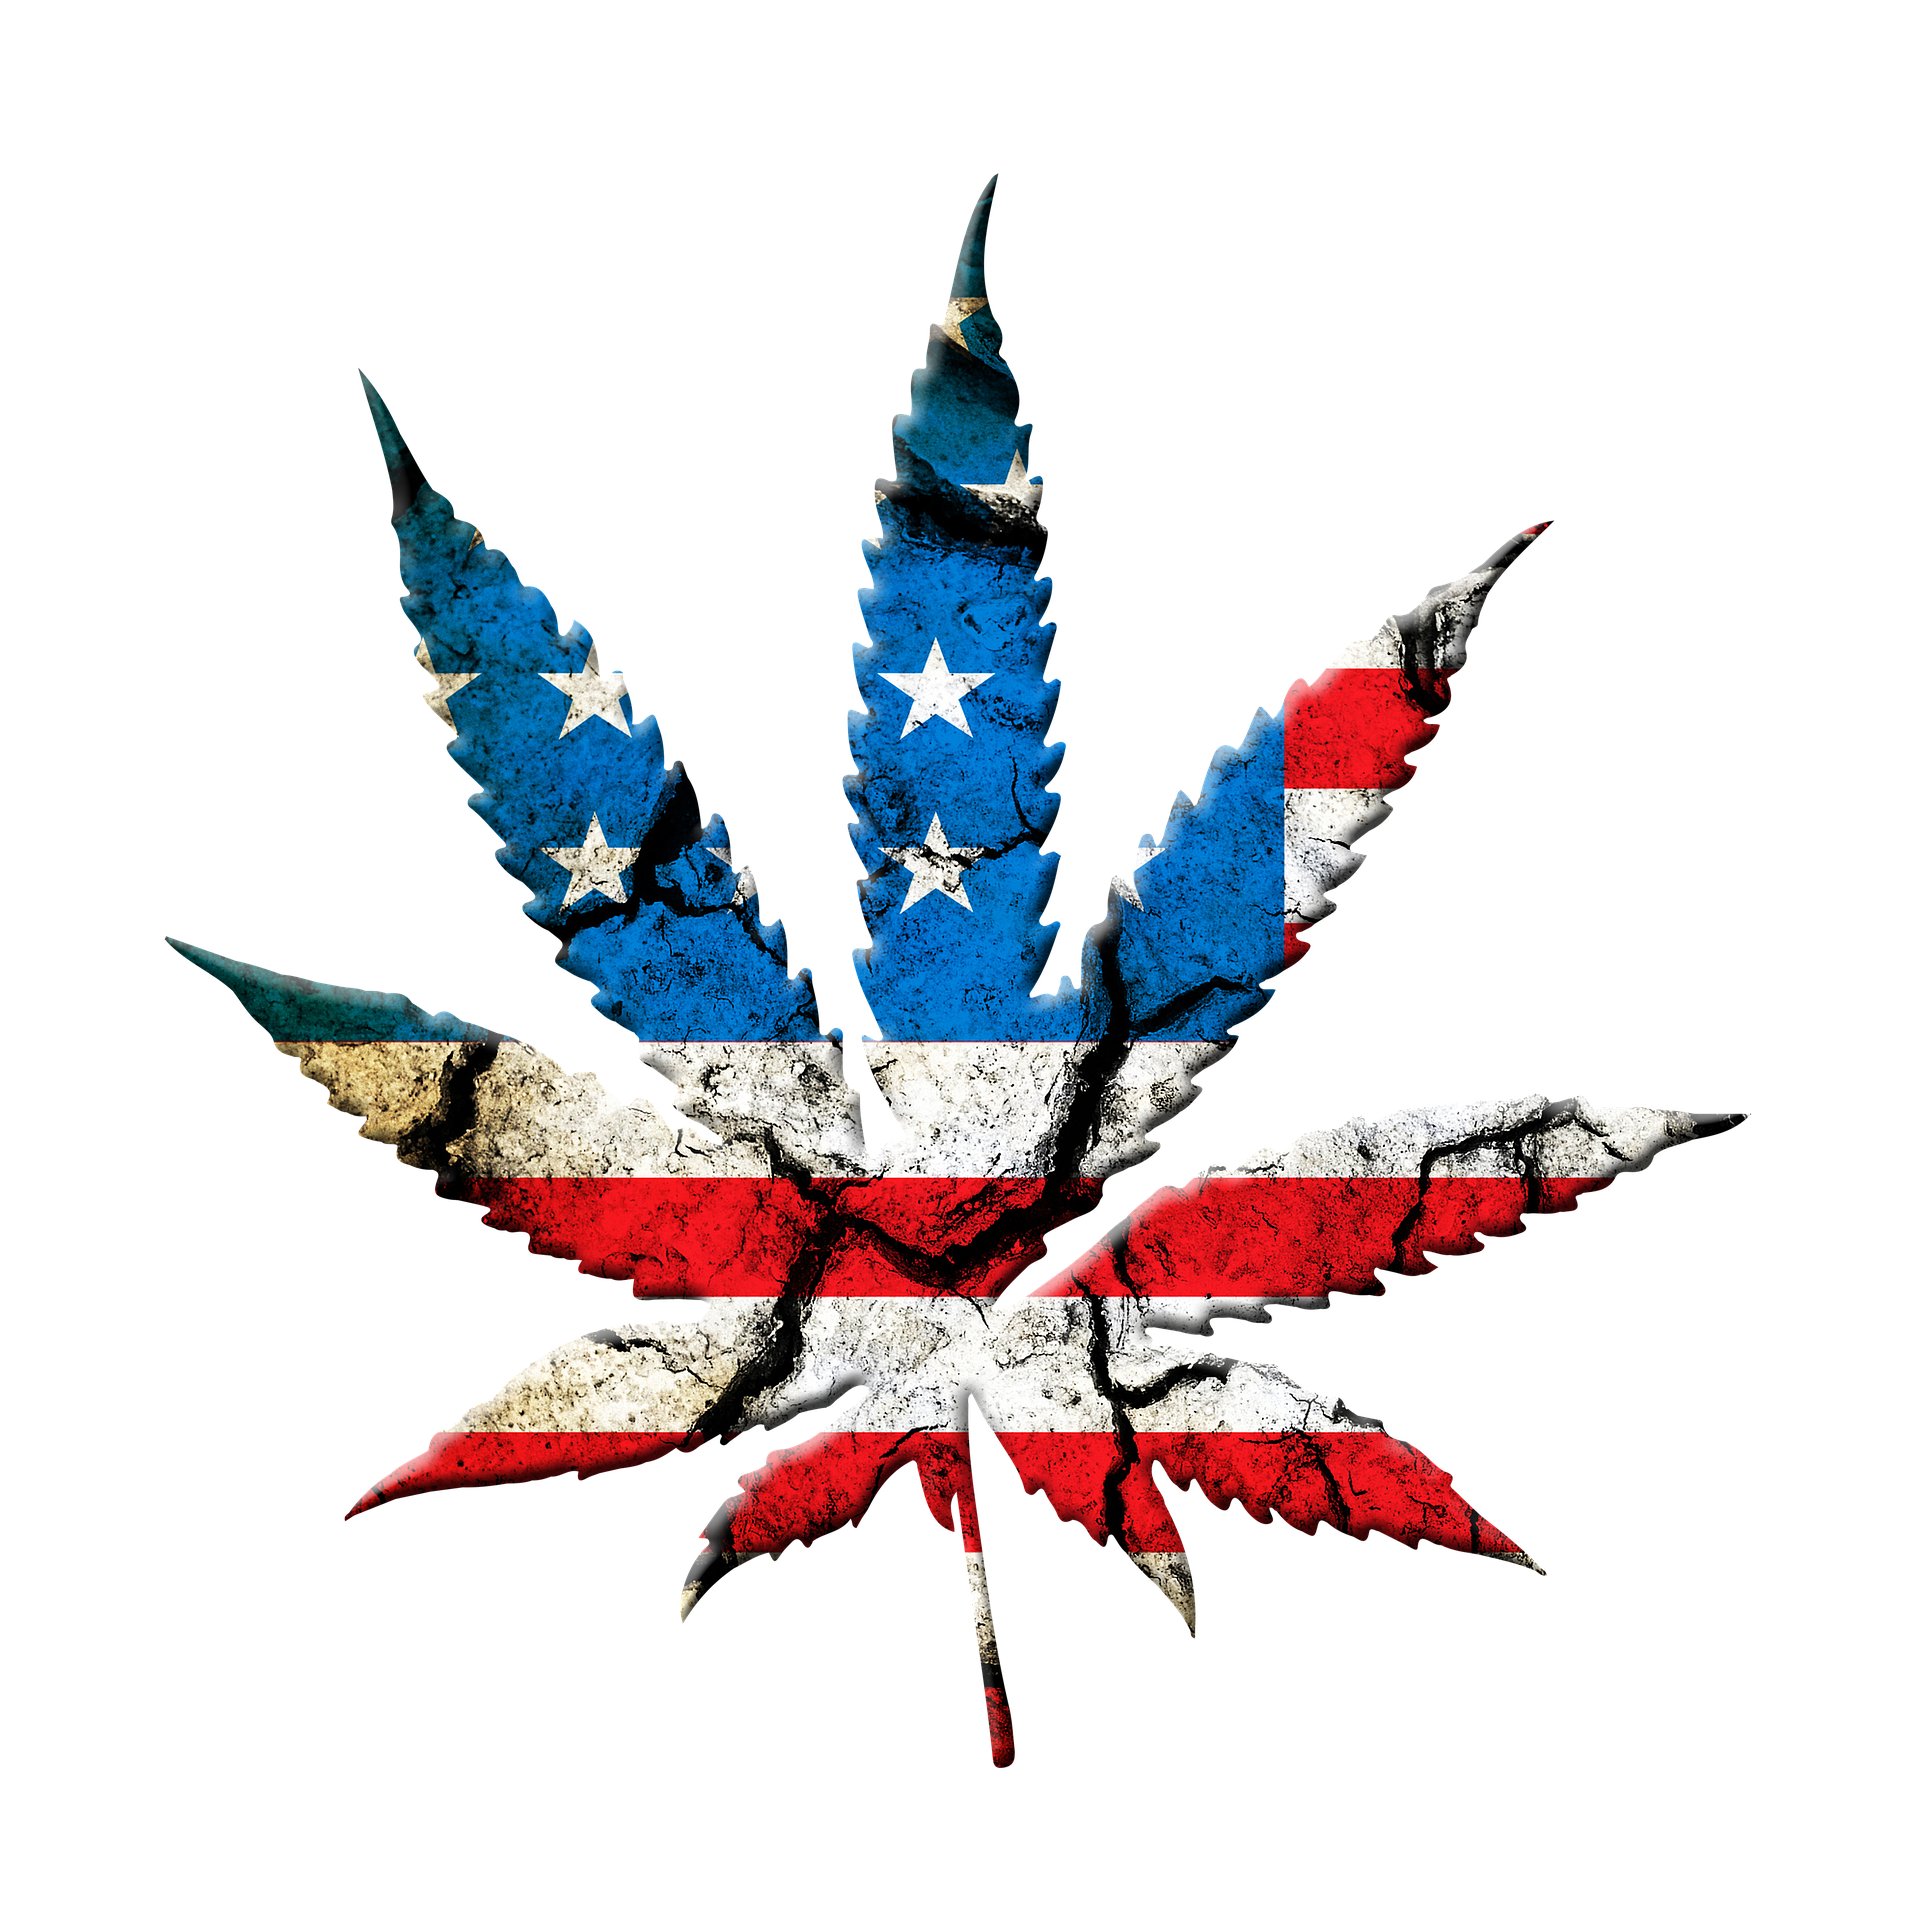 News over this past week will accelerate #marijuanalegalization in the US. #Mexico legalized #cannabis, #Democrats took back the House & #JeffSessions resigned.